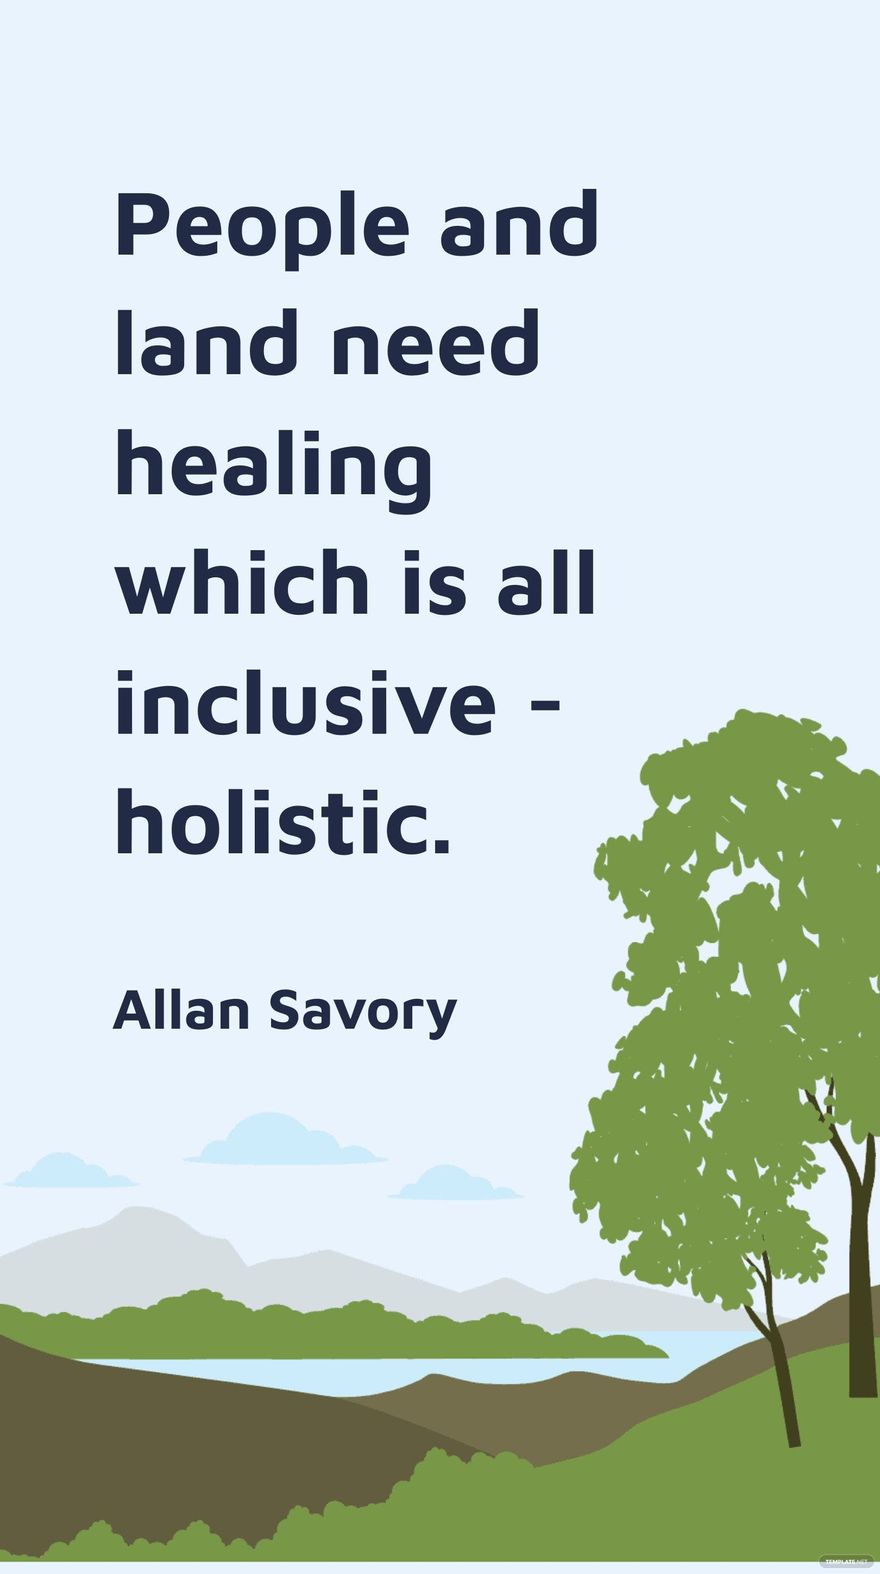 Free Allan Savory - People and land need healing which is all inclusive - holistic. in JPG